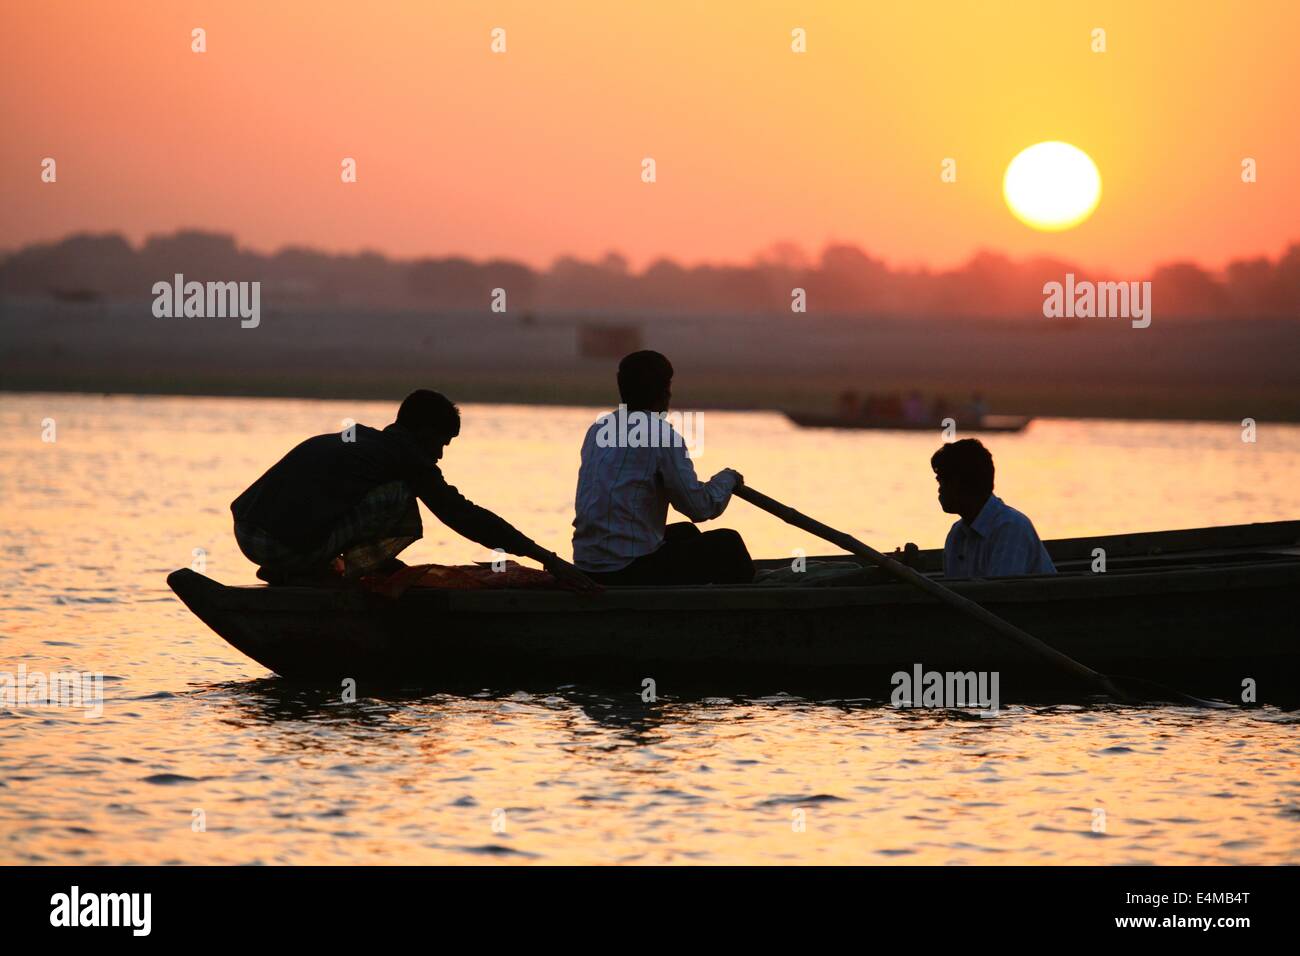 Sun sets over the Ganges silhouetting a boat with three people in it. Stock Photo